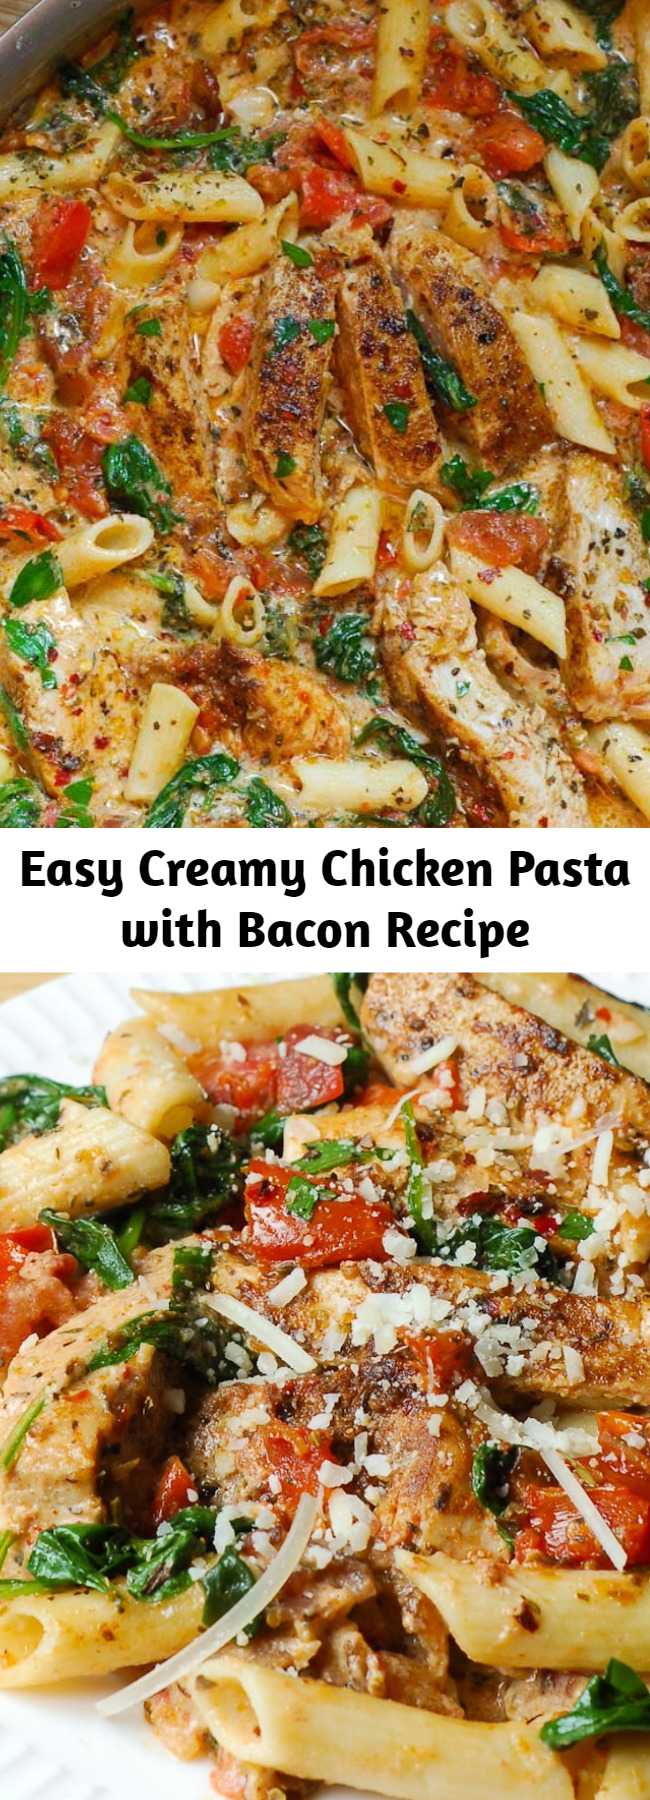 Easy Creamy Chicken Pasta with Bacon Recipe - Creamy chicken pasta with bacon is easy to make weeknight one pot pasta dish! With only 30 minutes of total work, this chicken dinner recipe is simple, fast and delicious! Full of tender chicken, spinach, tomatoes, and bacon! #chickenpasta #bacon #easydinner #30minutemeal